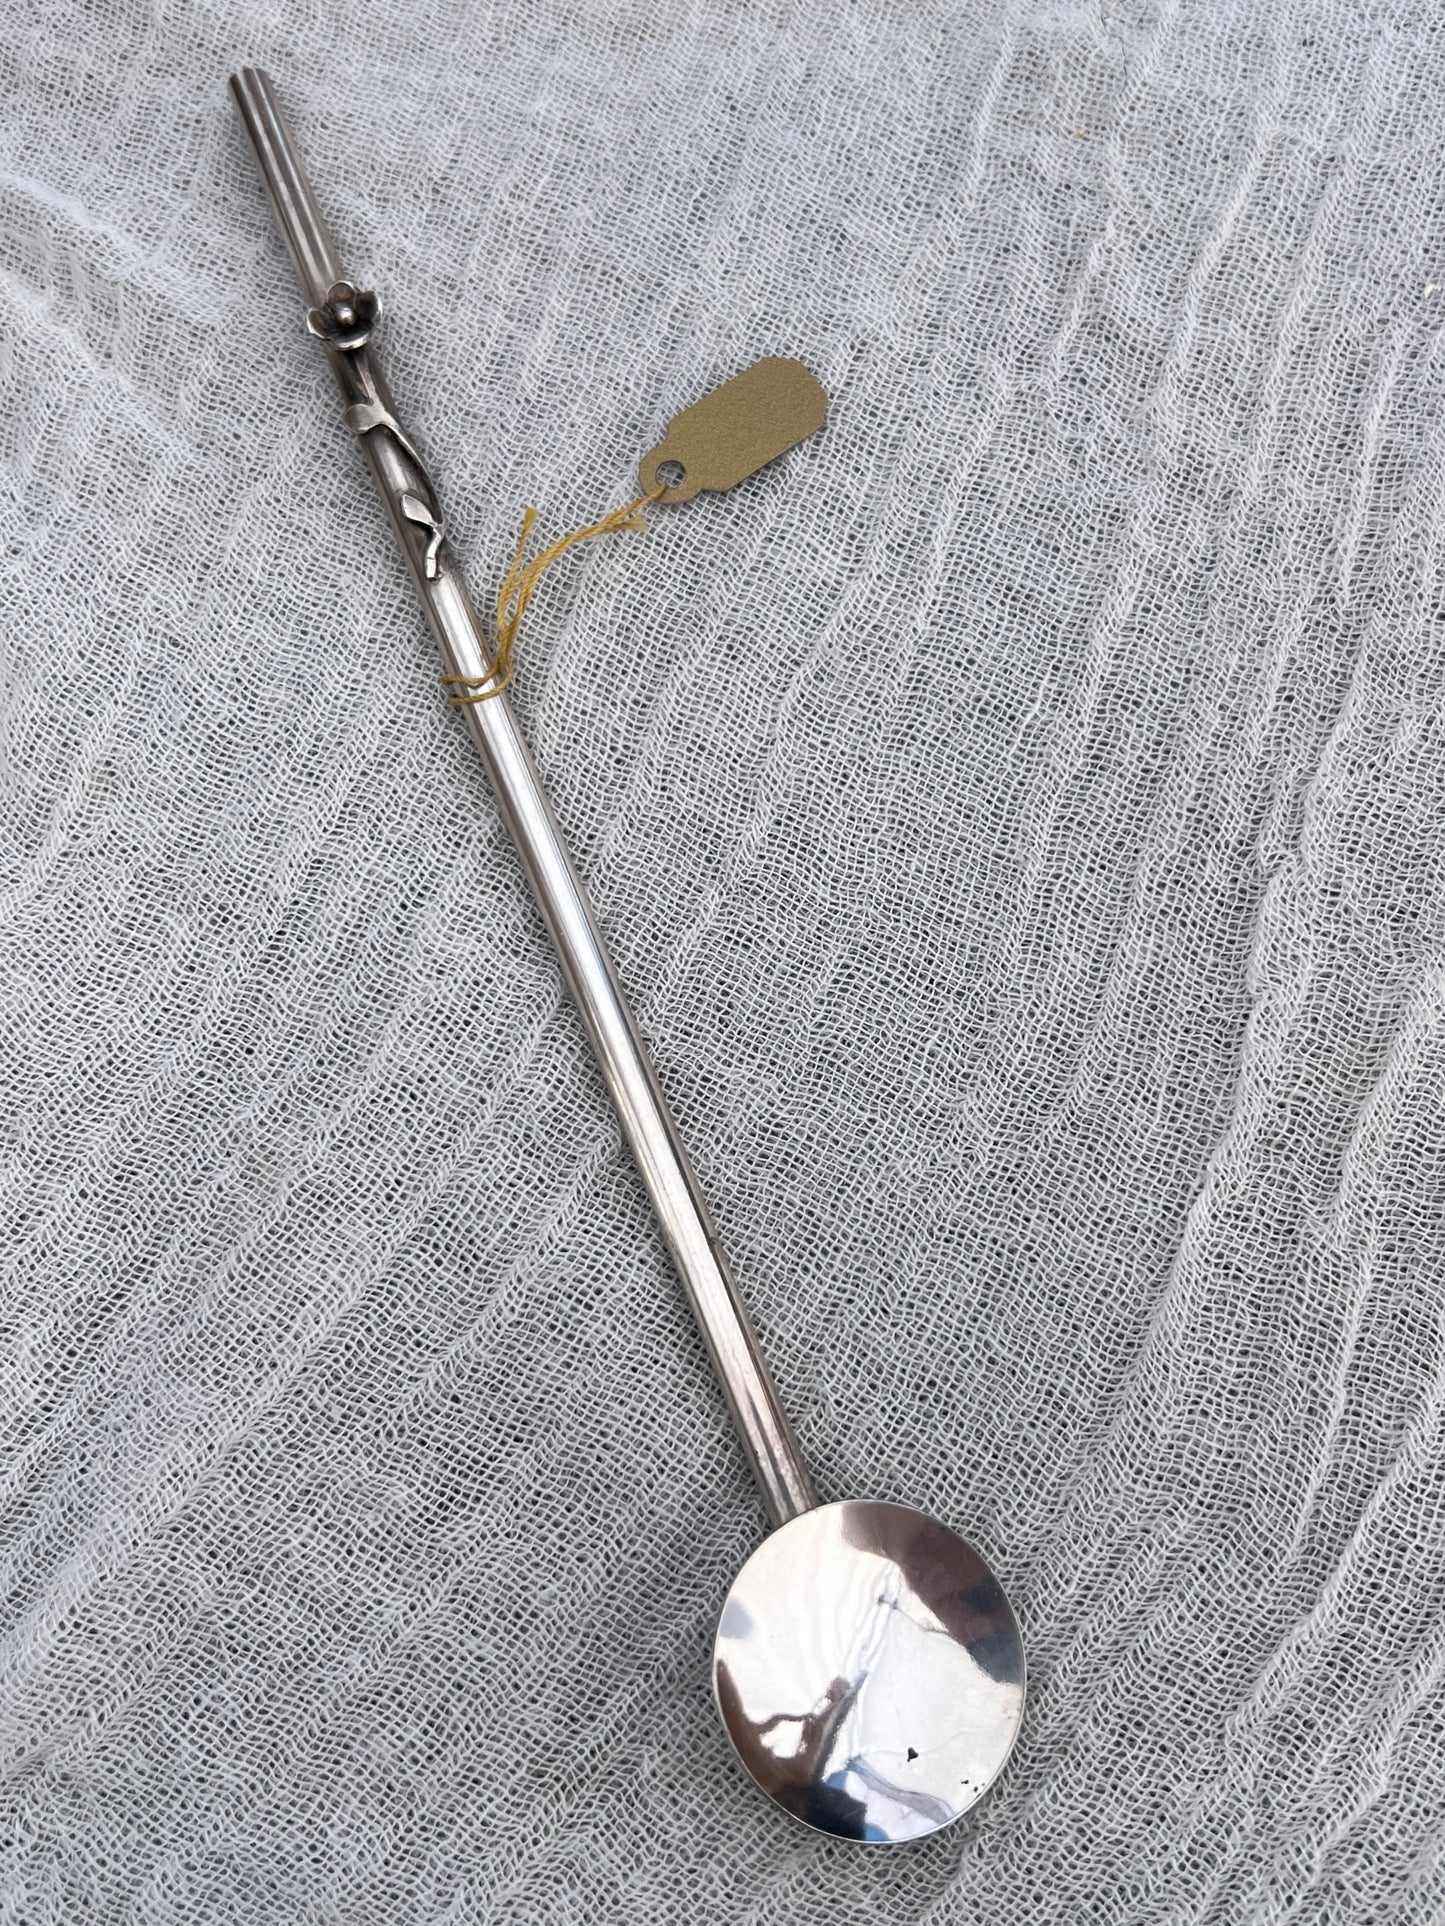 Little Italy Shaved Ice Spoon